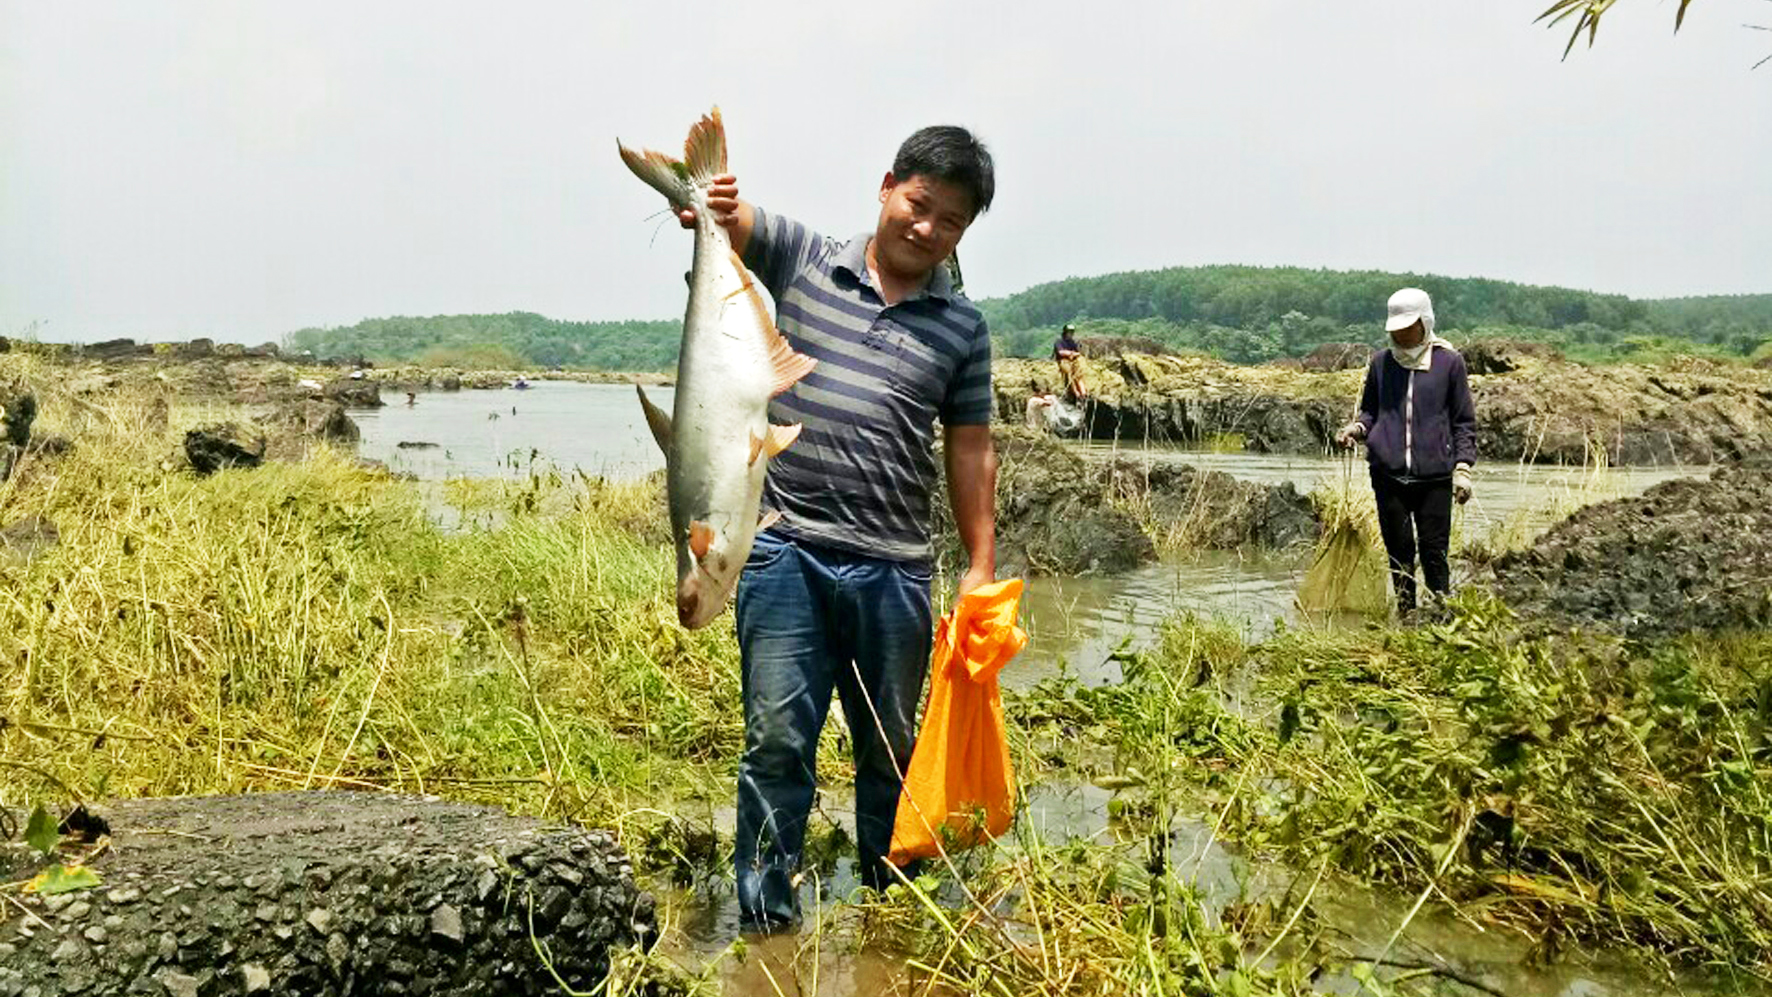 A local resident shows off a fish he has just caught.